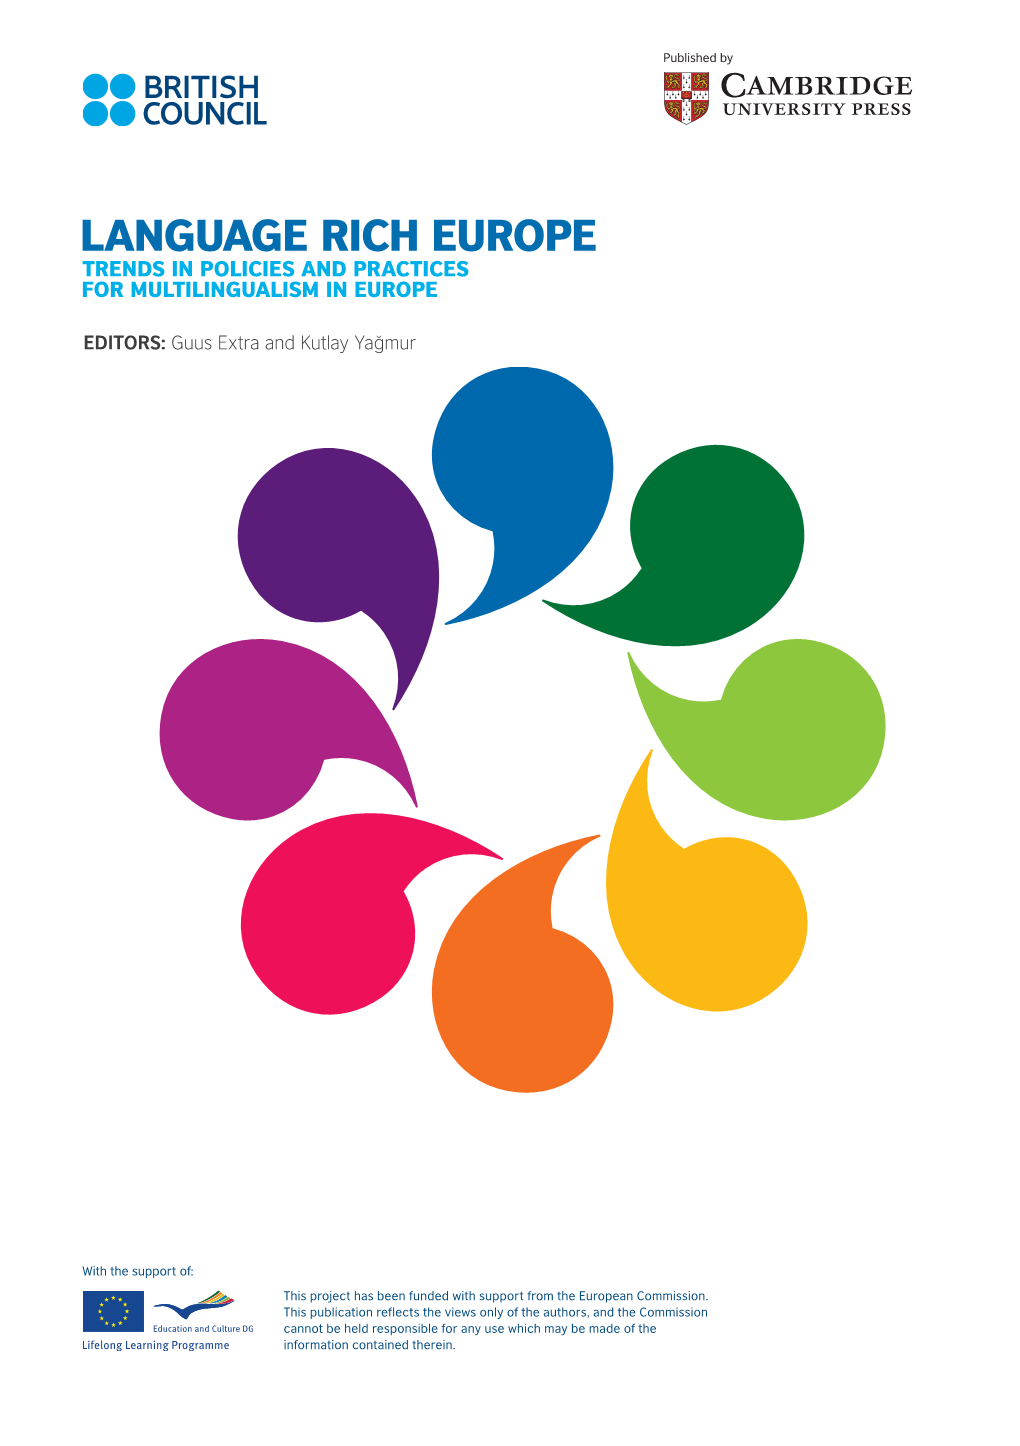 Language Rich Europe Project Is Delivered by a Consortium of Over 30 Partners